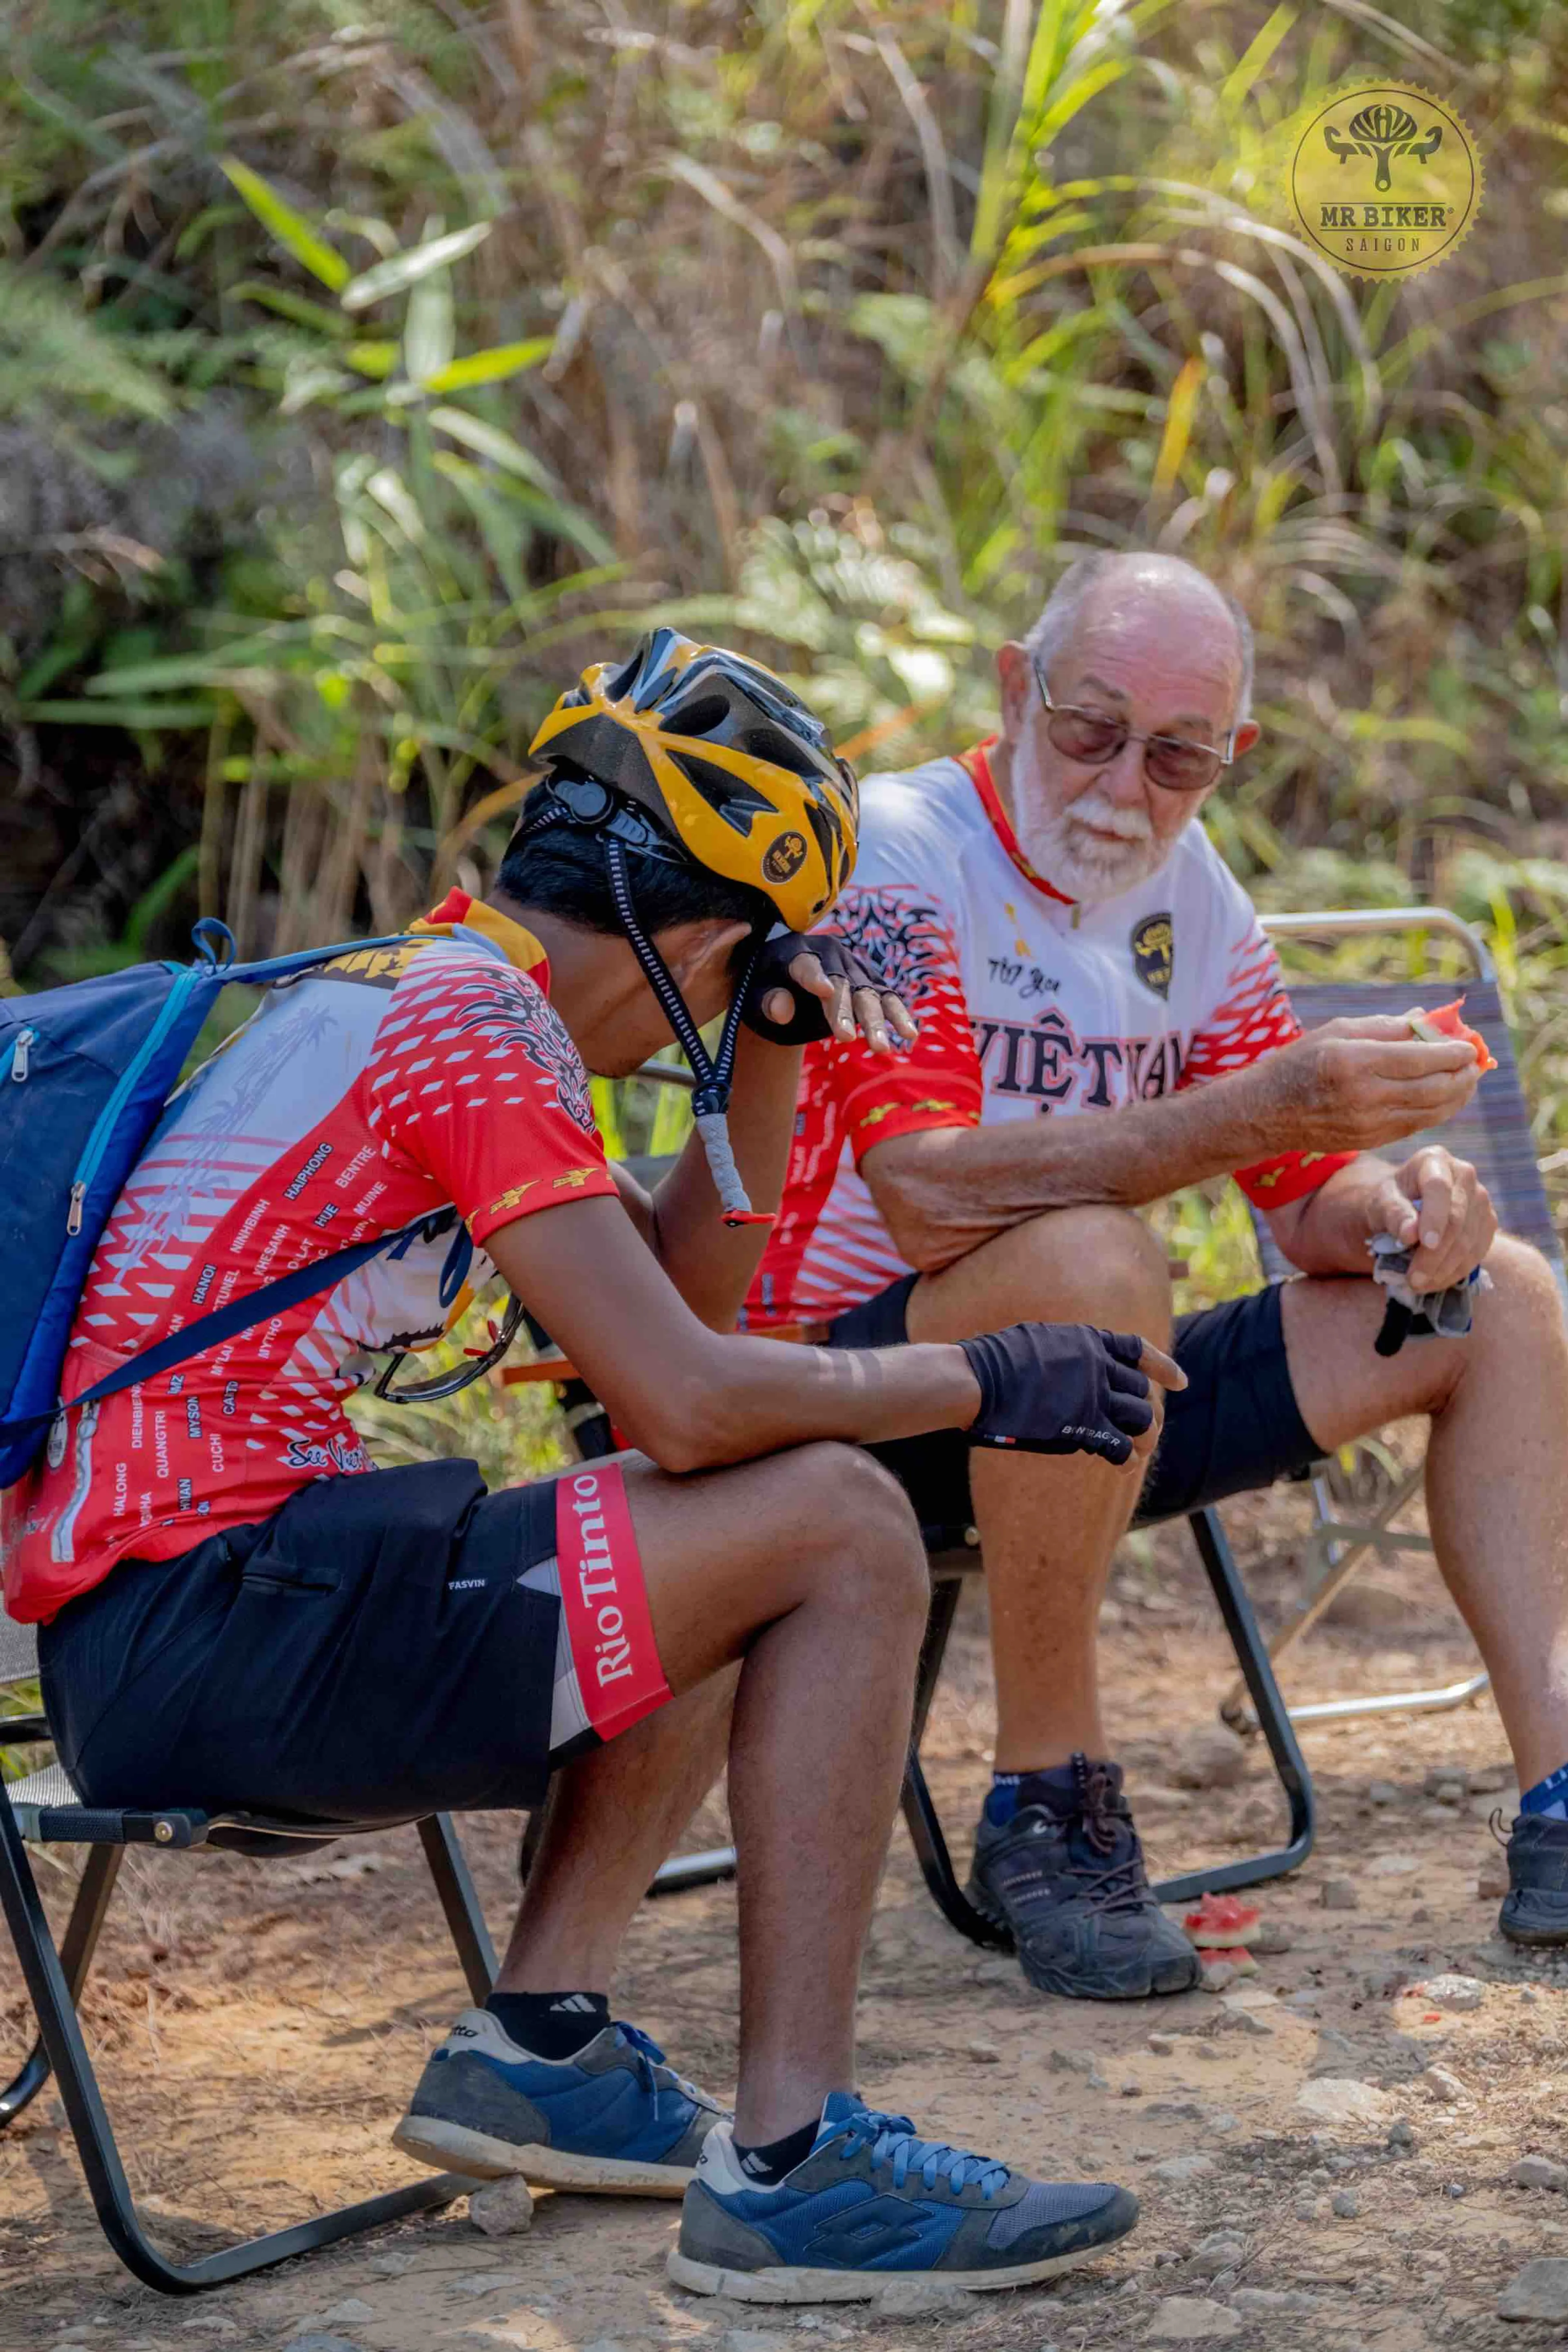 On every day of our cycling trip - Mr Biker Saigon guides will always talk and make sure all of your needs are sastified